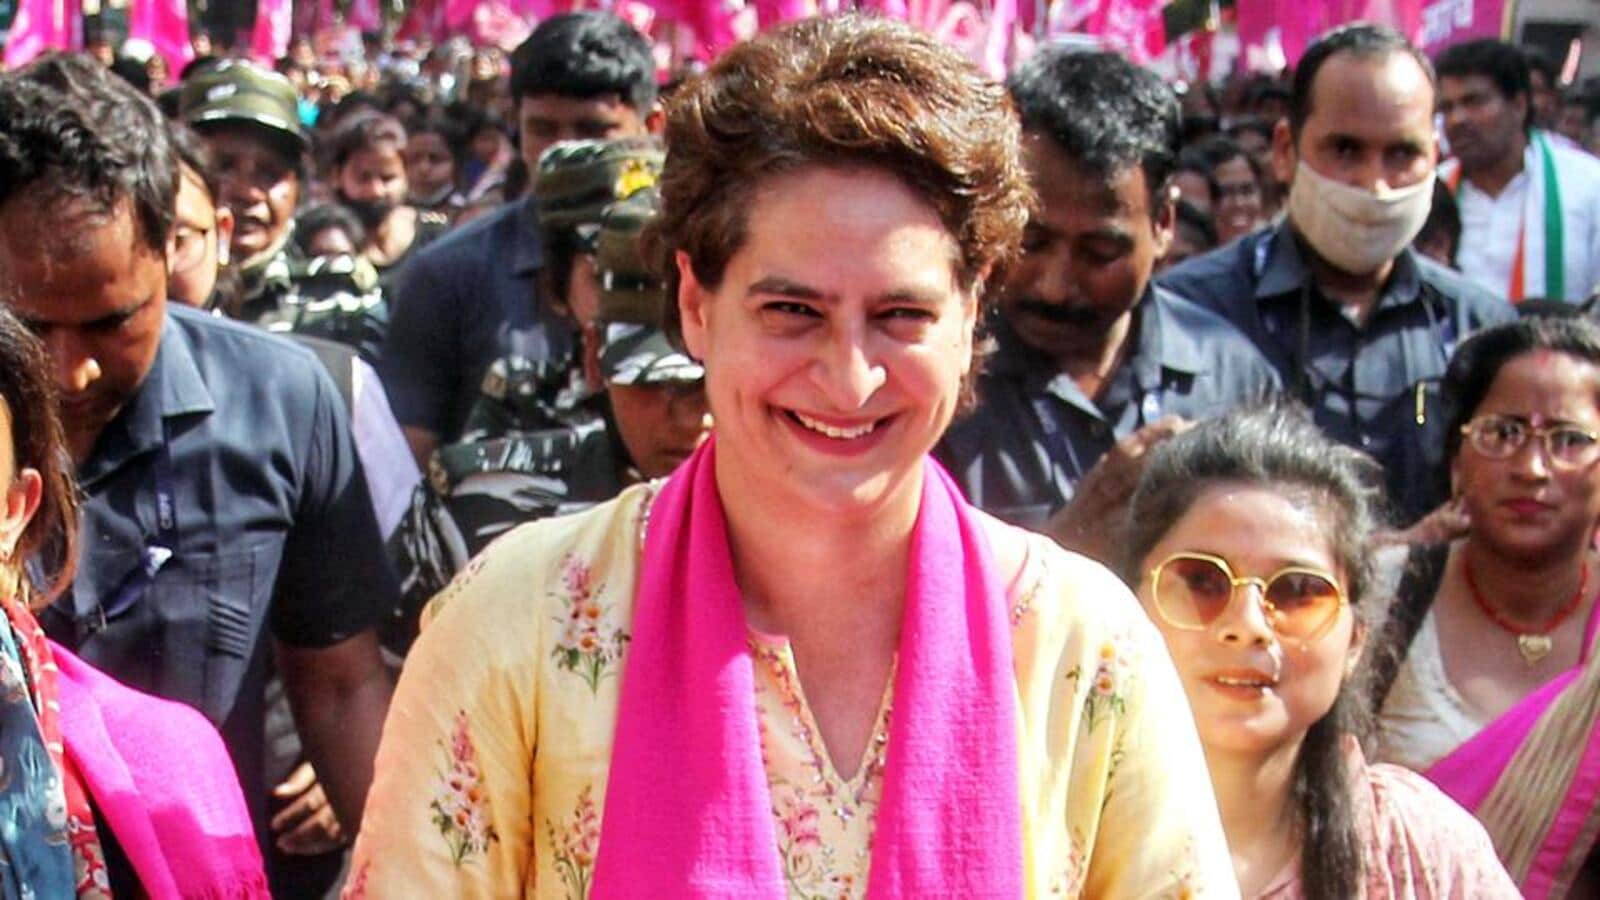 UP election result: Congress’s hard work failed to translate into votes, says Priyanka